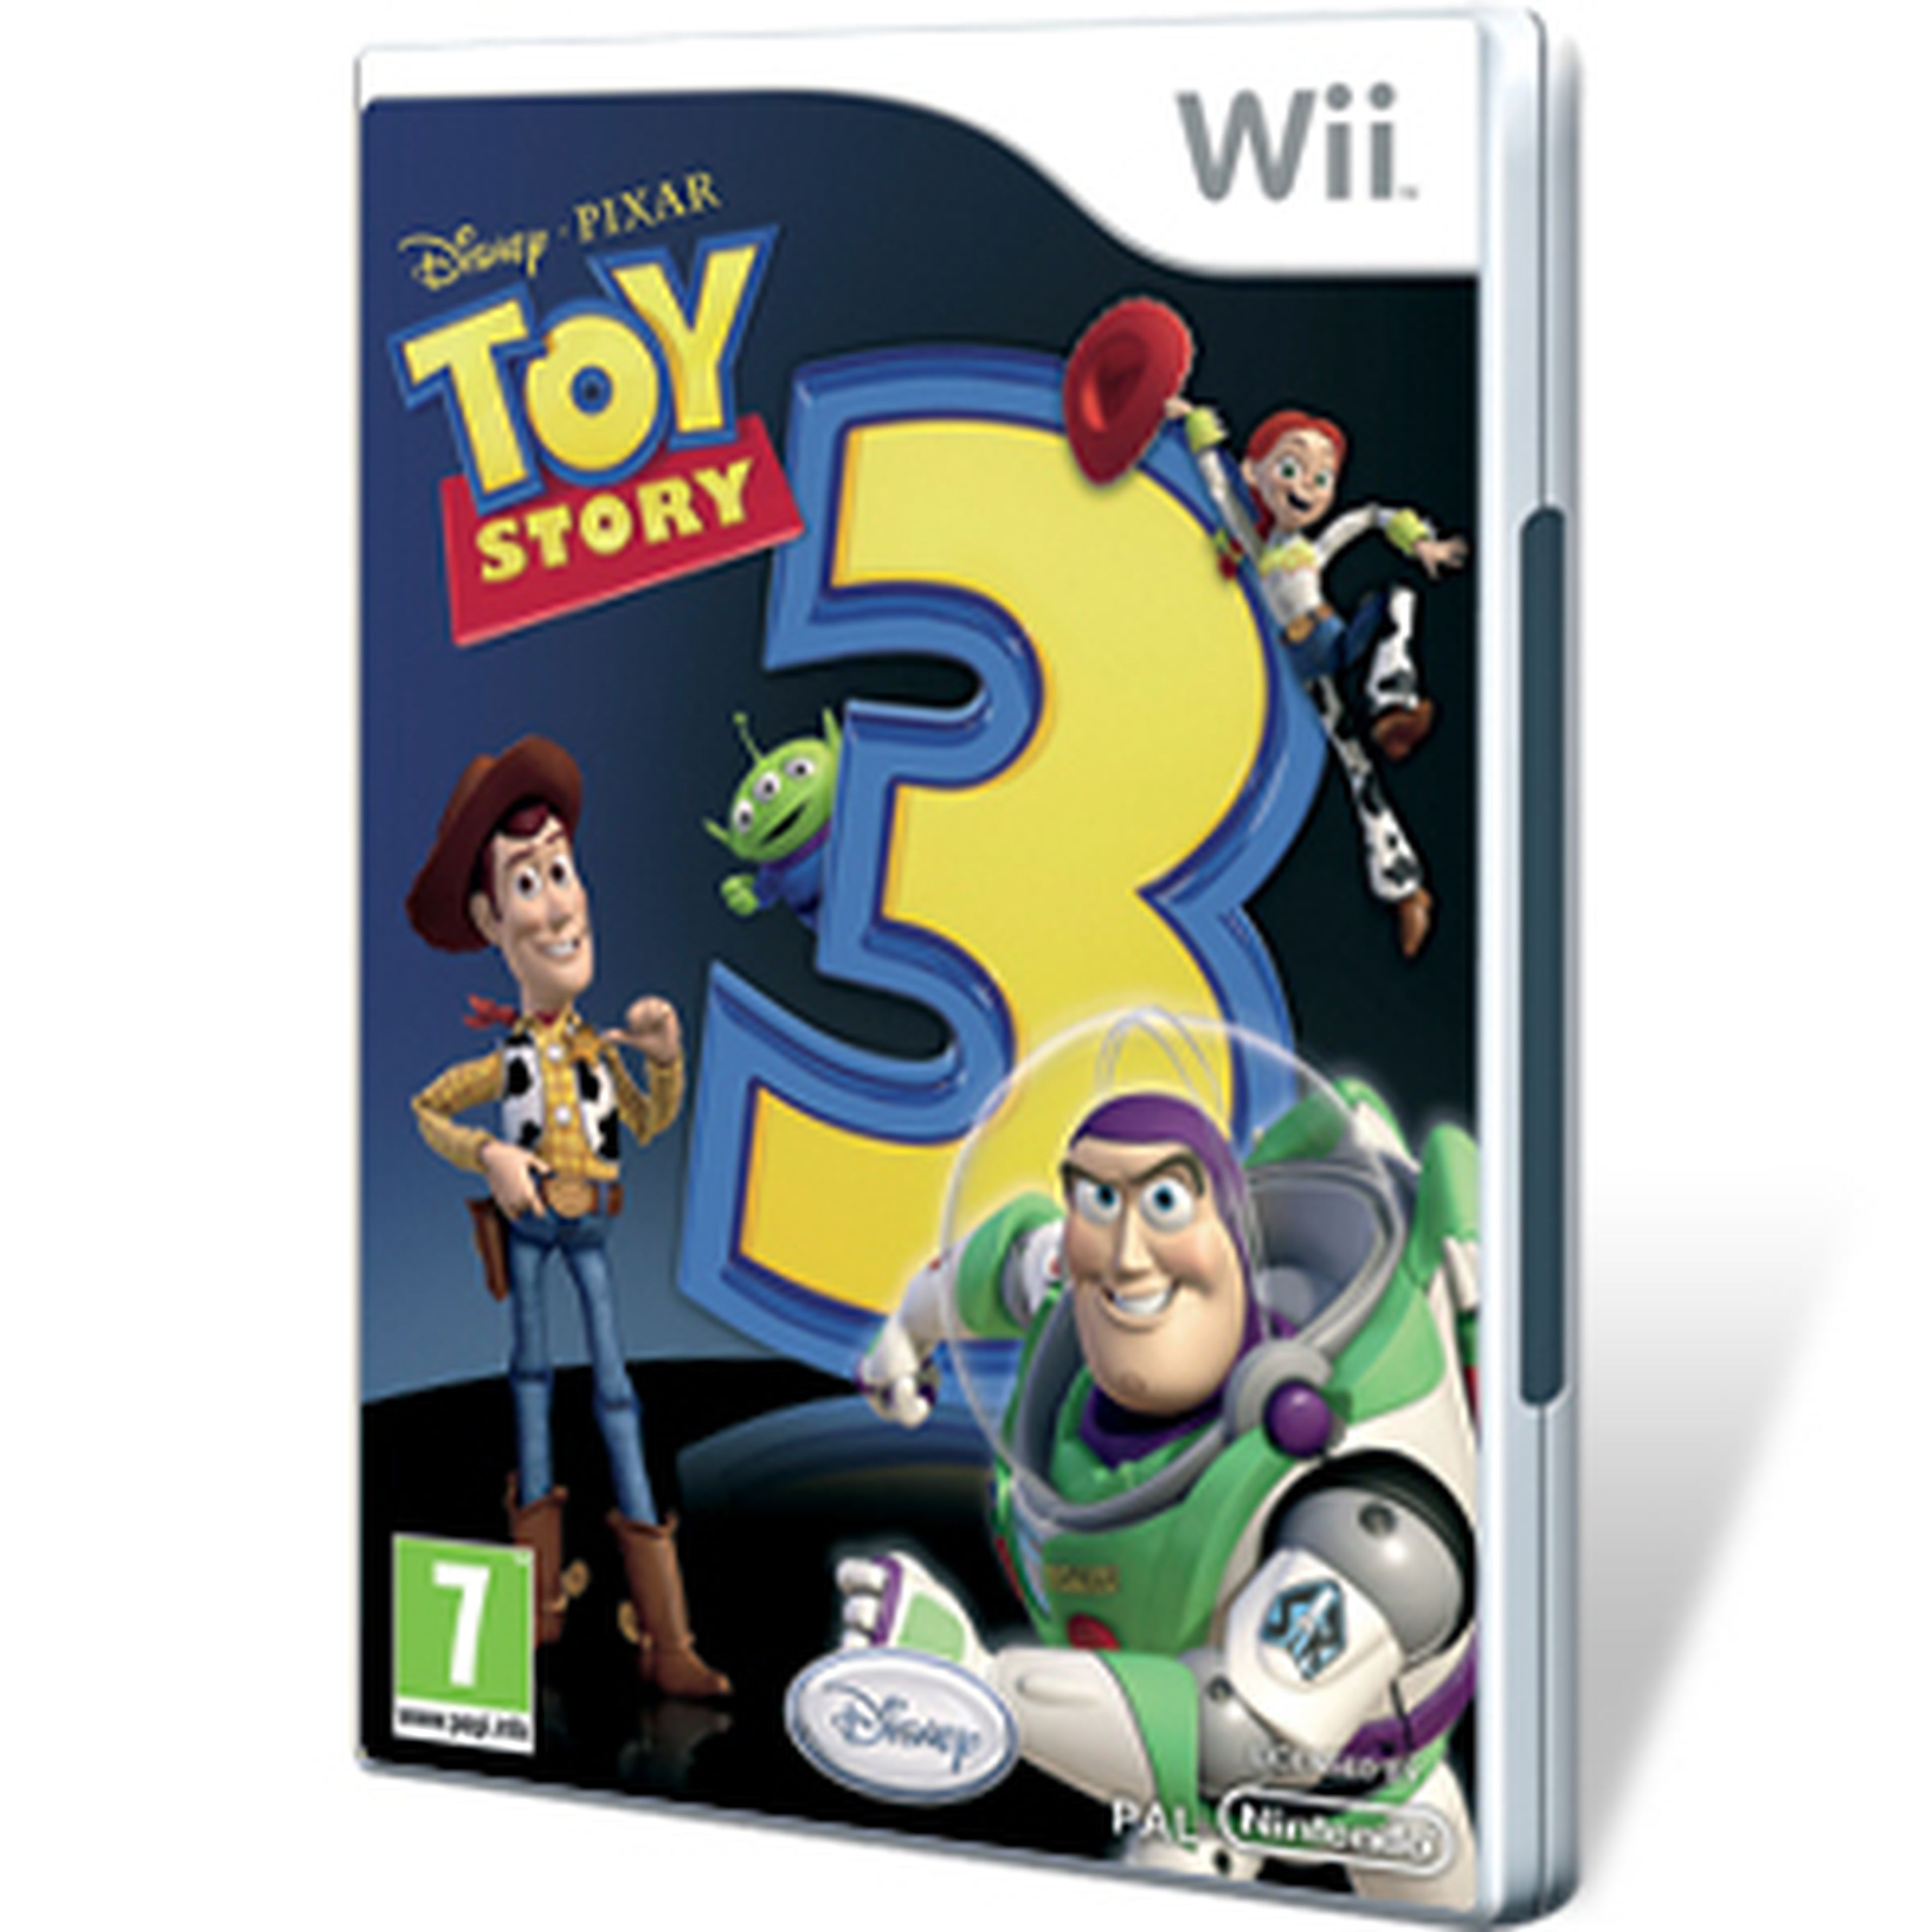 Toy Story 3 para Wii